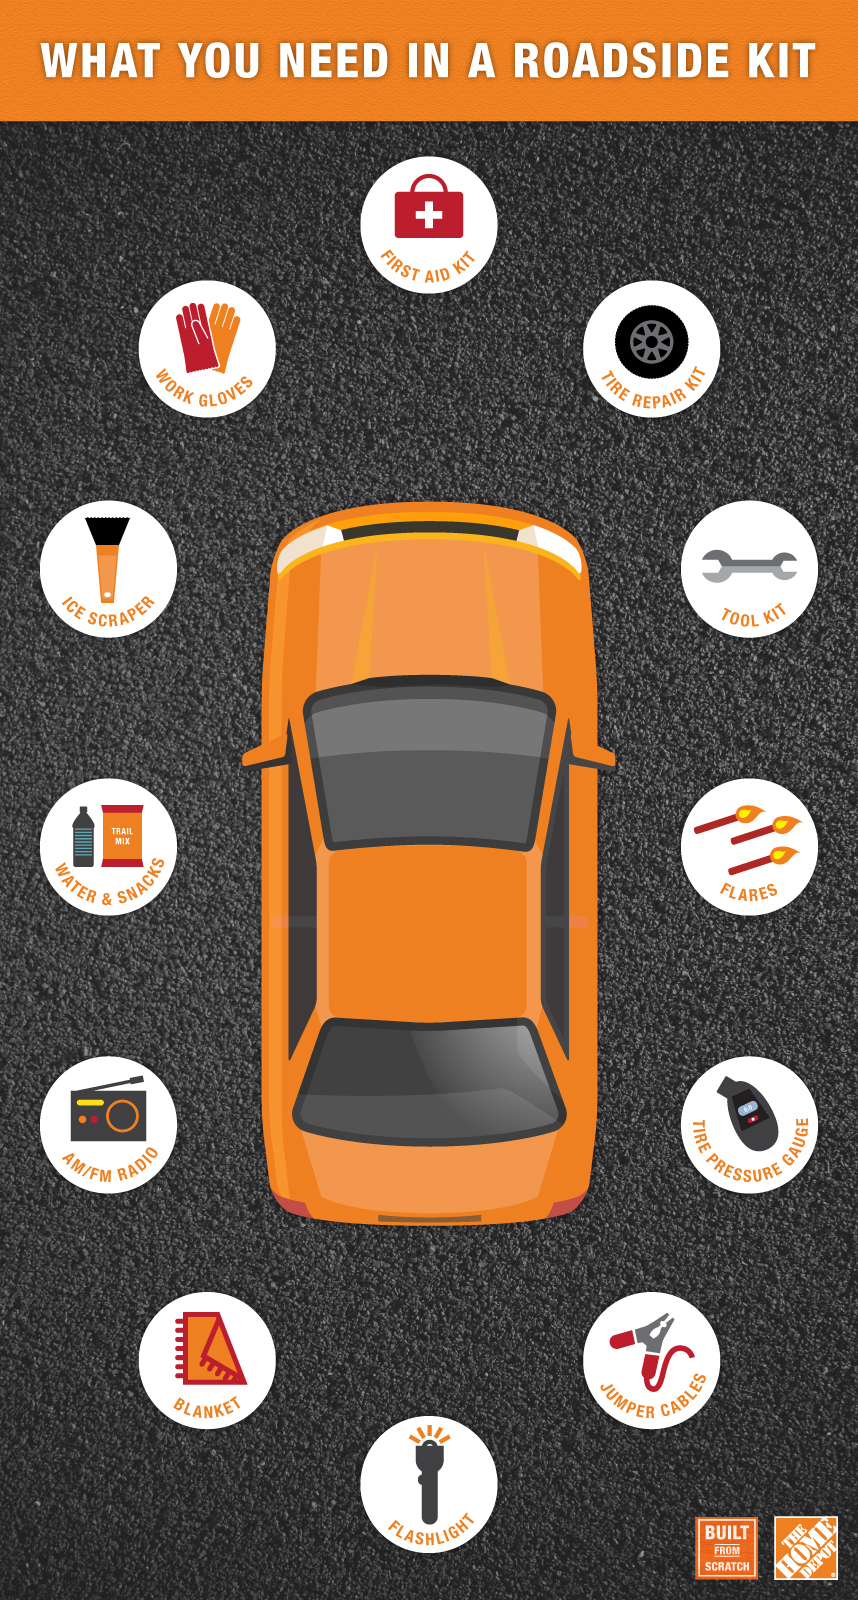 What you need in a roadside kit infographic